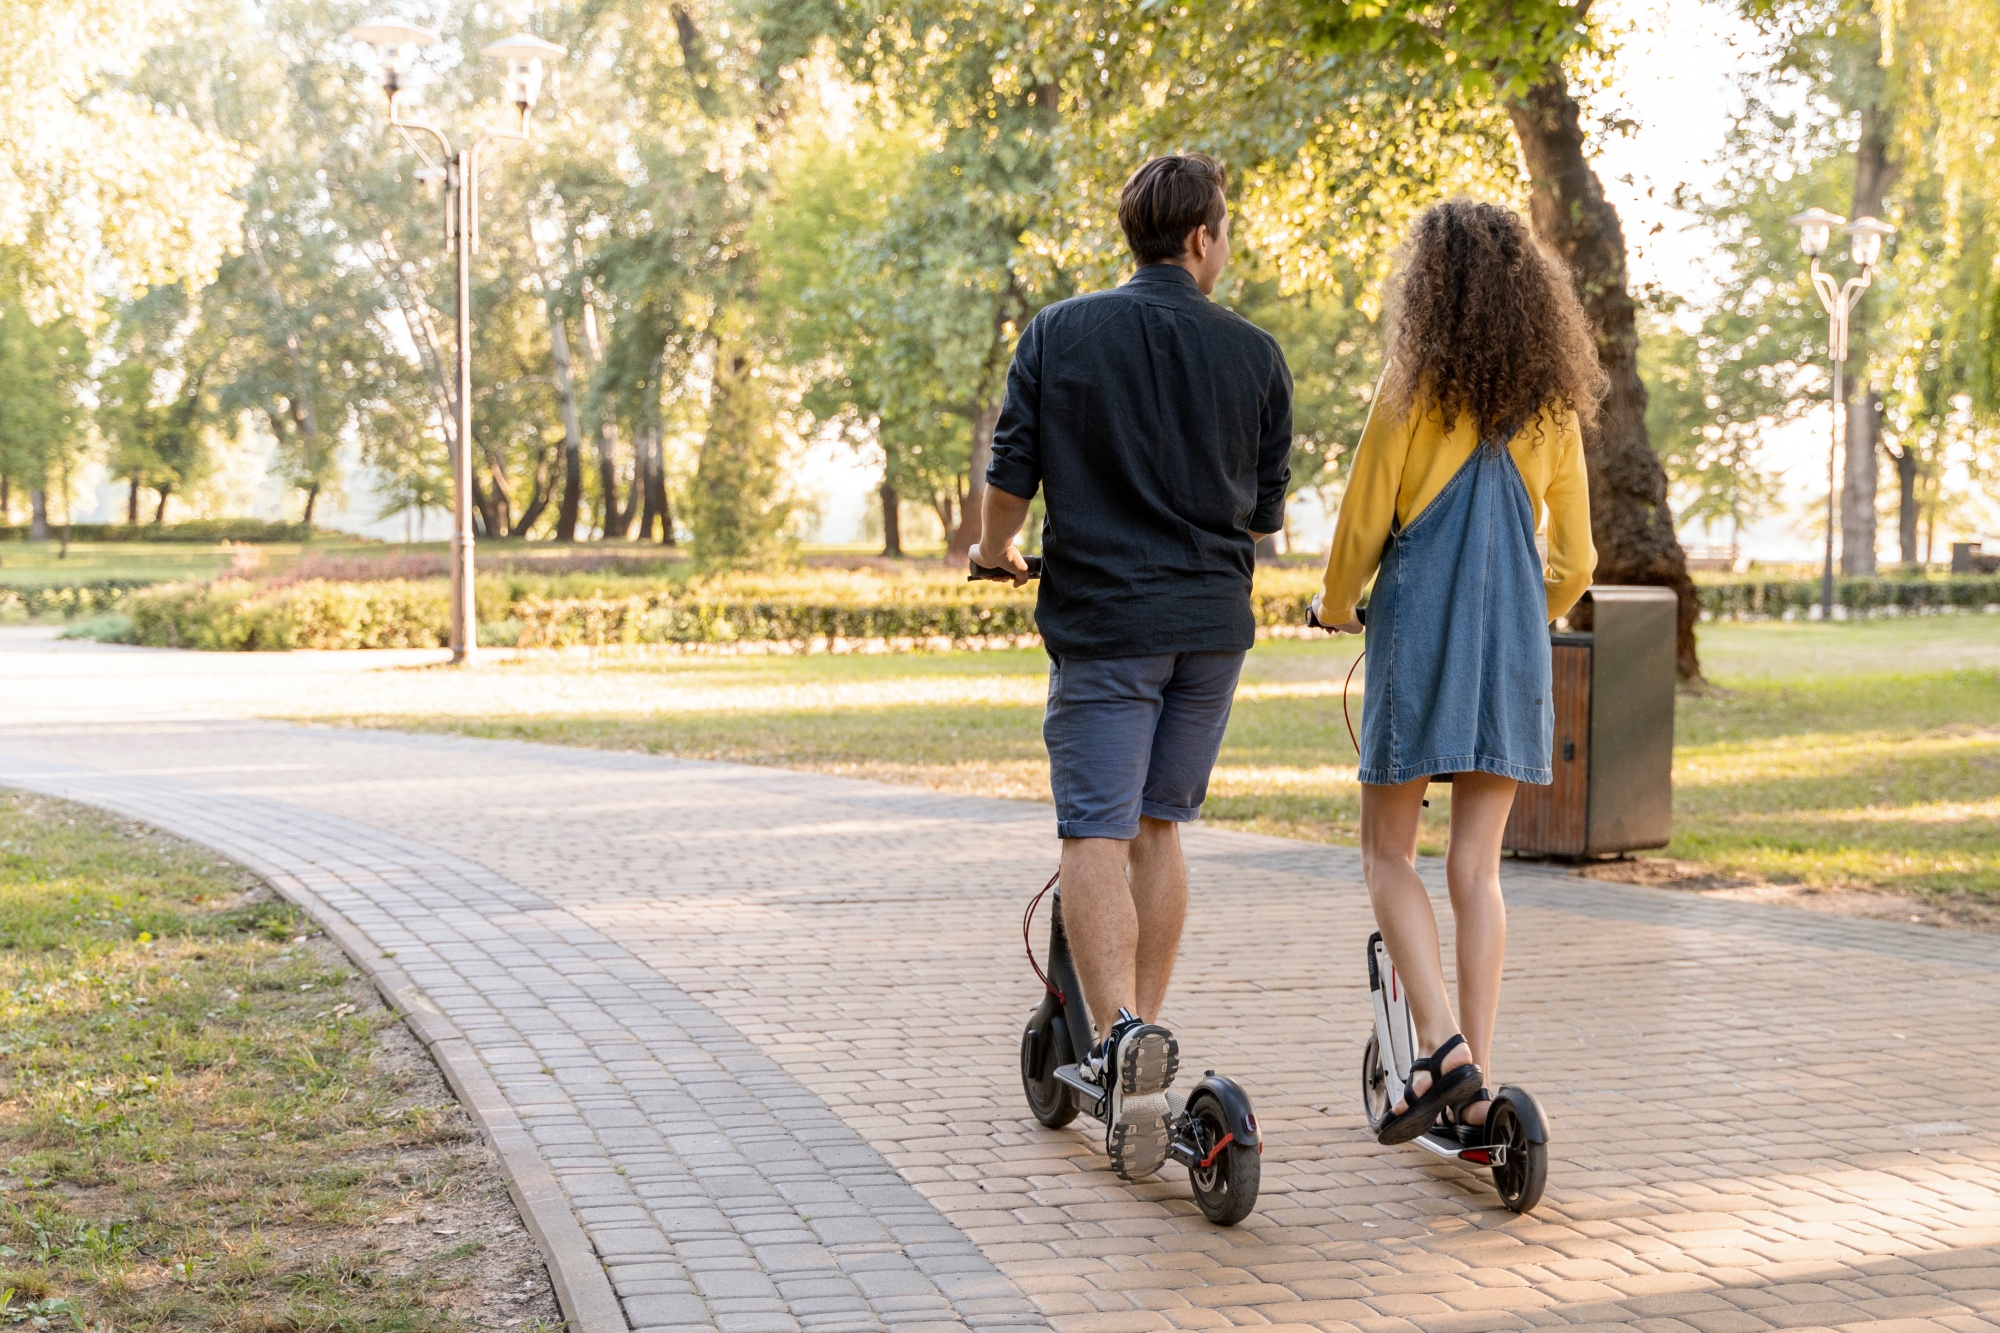 https://175main.com/wp-content/uploads/2024/02/cute-young-couple-riding-scooter-outdoors.jpg